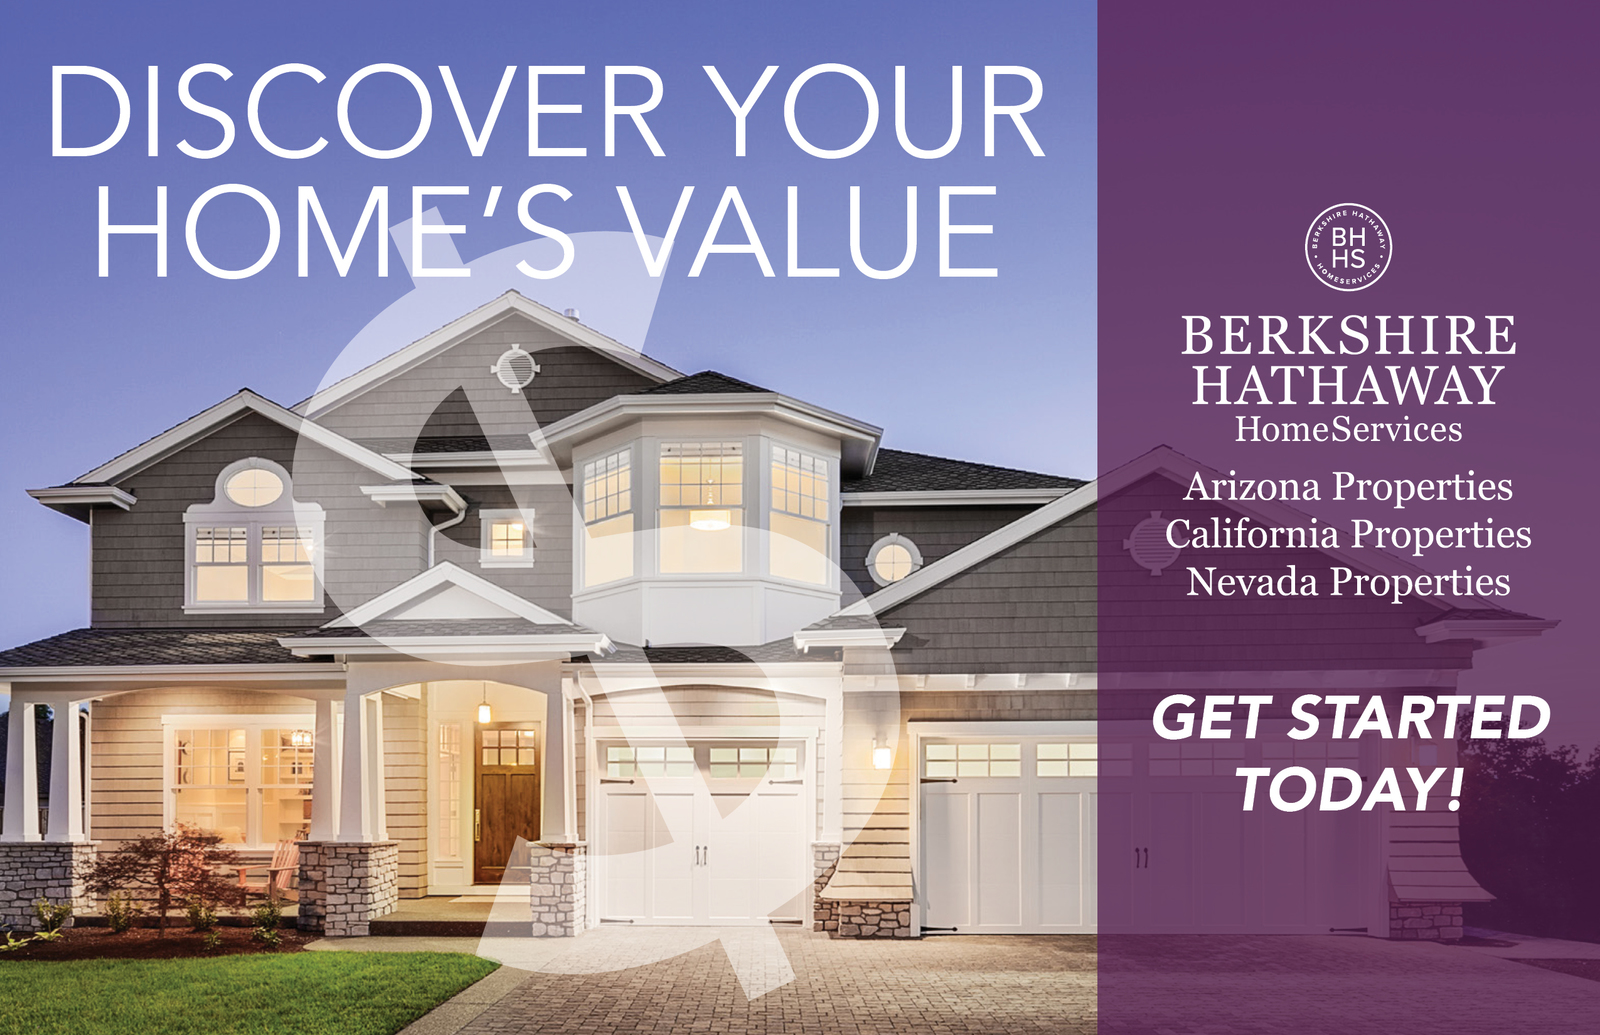 Discover Your Home's Value - Buyer Match